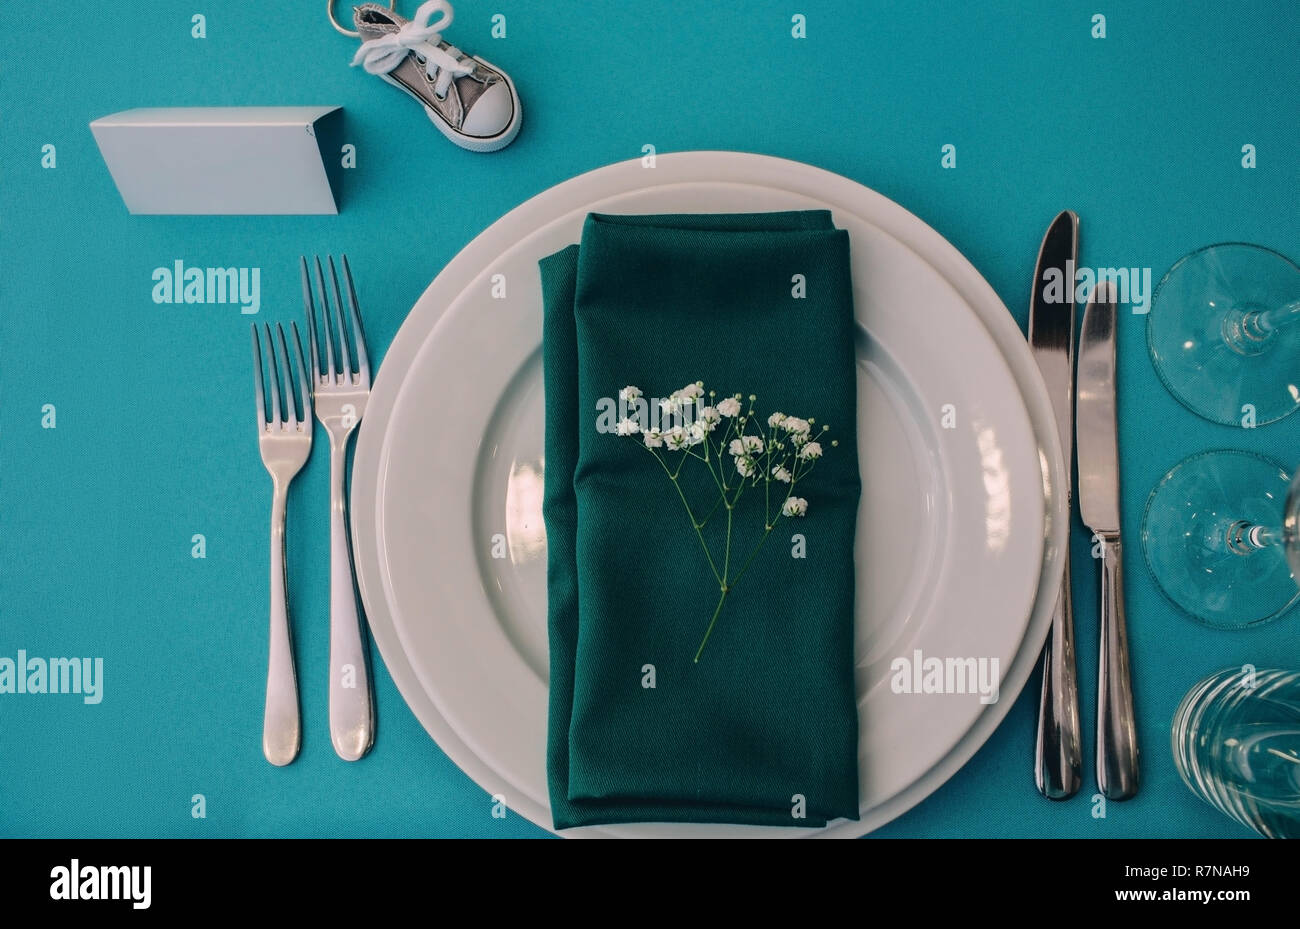 Dinner plate setting on a turquoise table , top view. Stock Photo